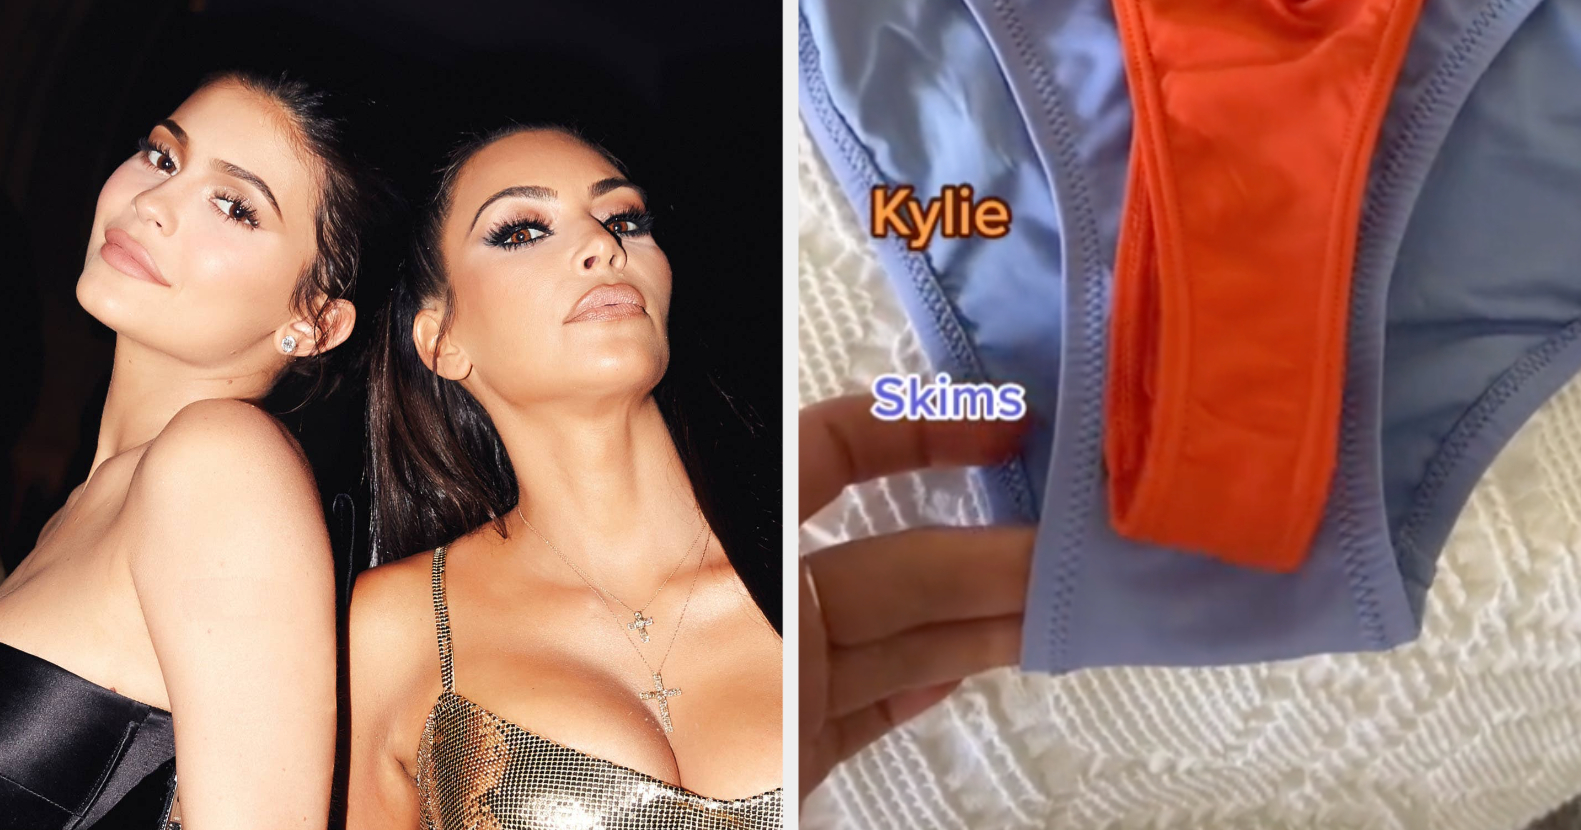 Viral Video Compares Kylie Jenner's Disaster Products to Kim